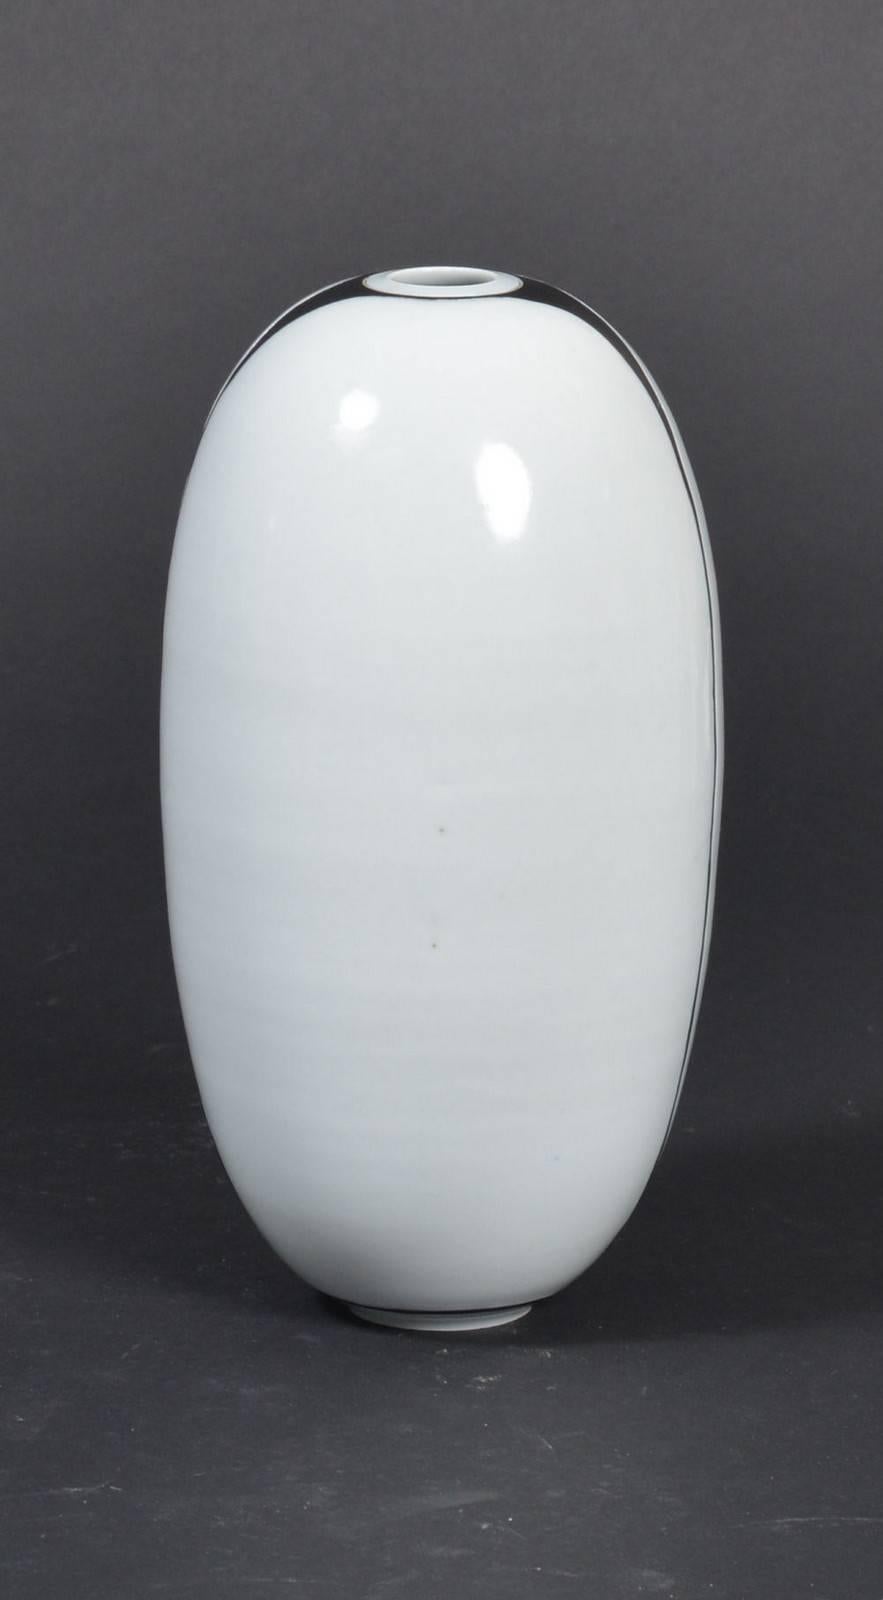 Large vase, porcelain, minimalistic decorated, signed at the bottom. Made in Denmark in the 1970s.